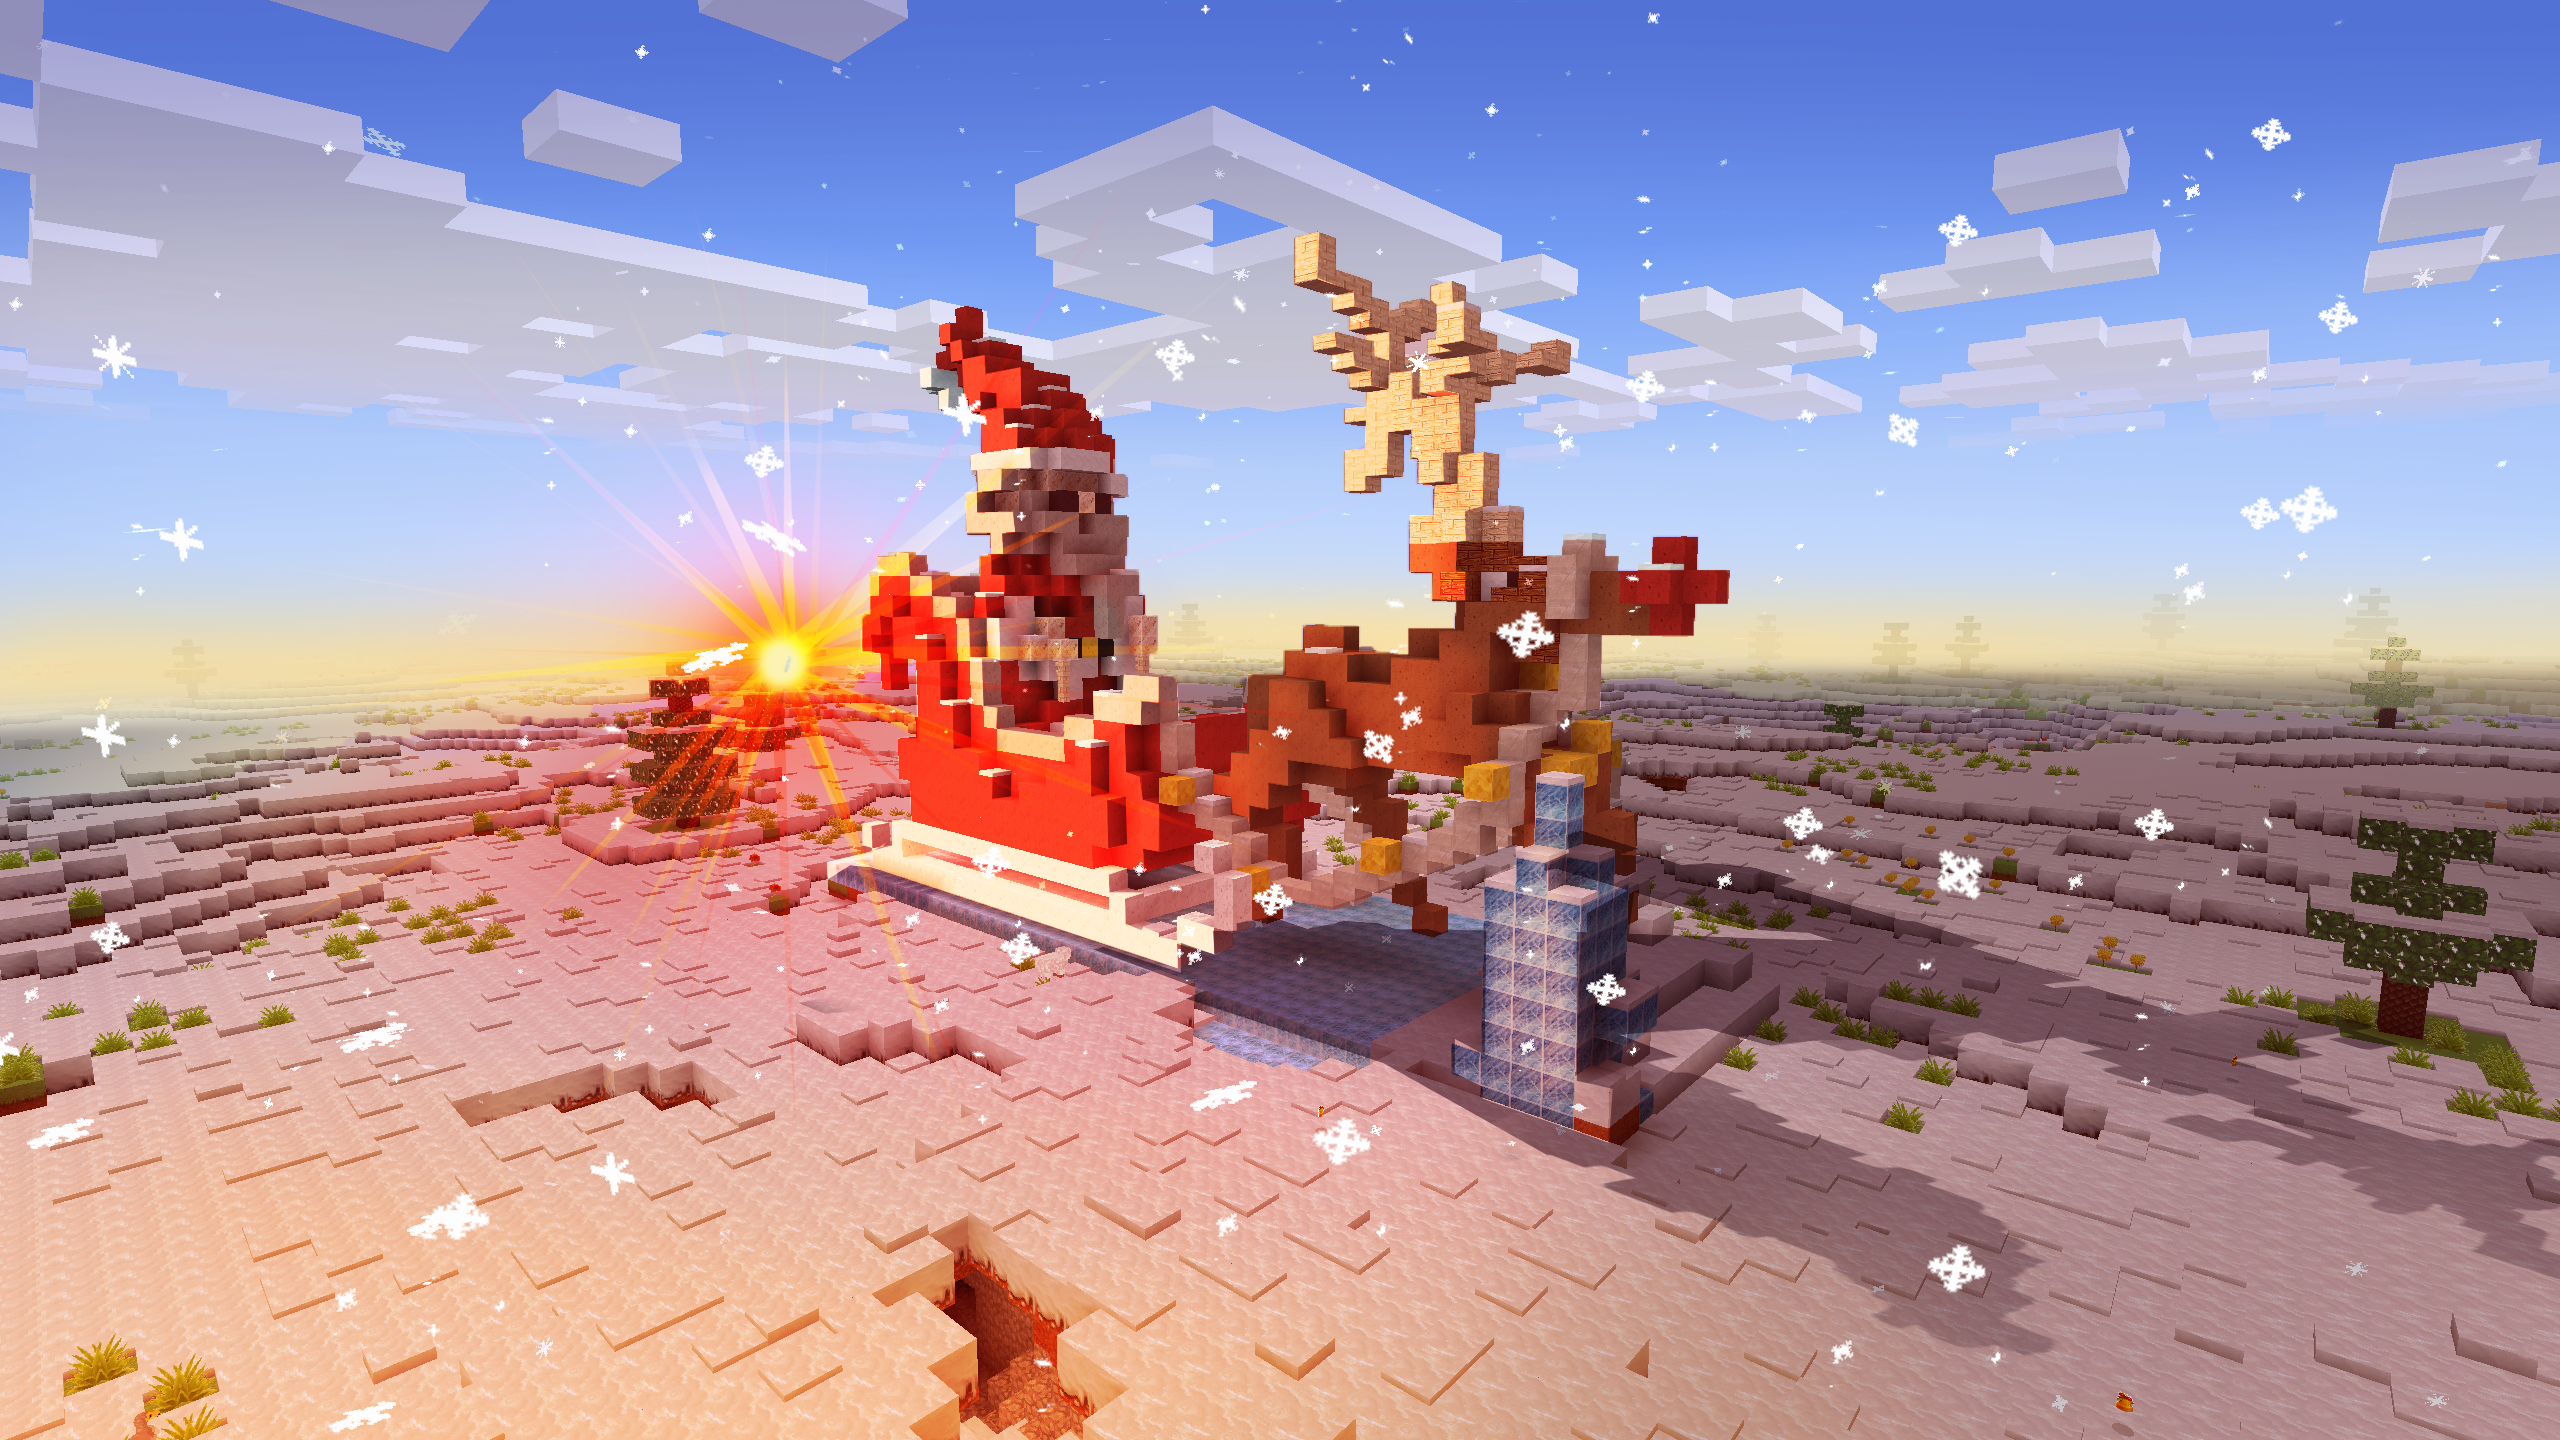 General 2560x1440 video games PC gaming Christmas screen shot Minecraft